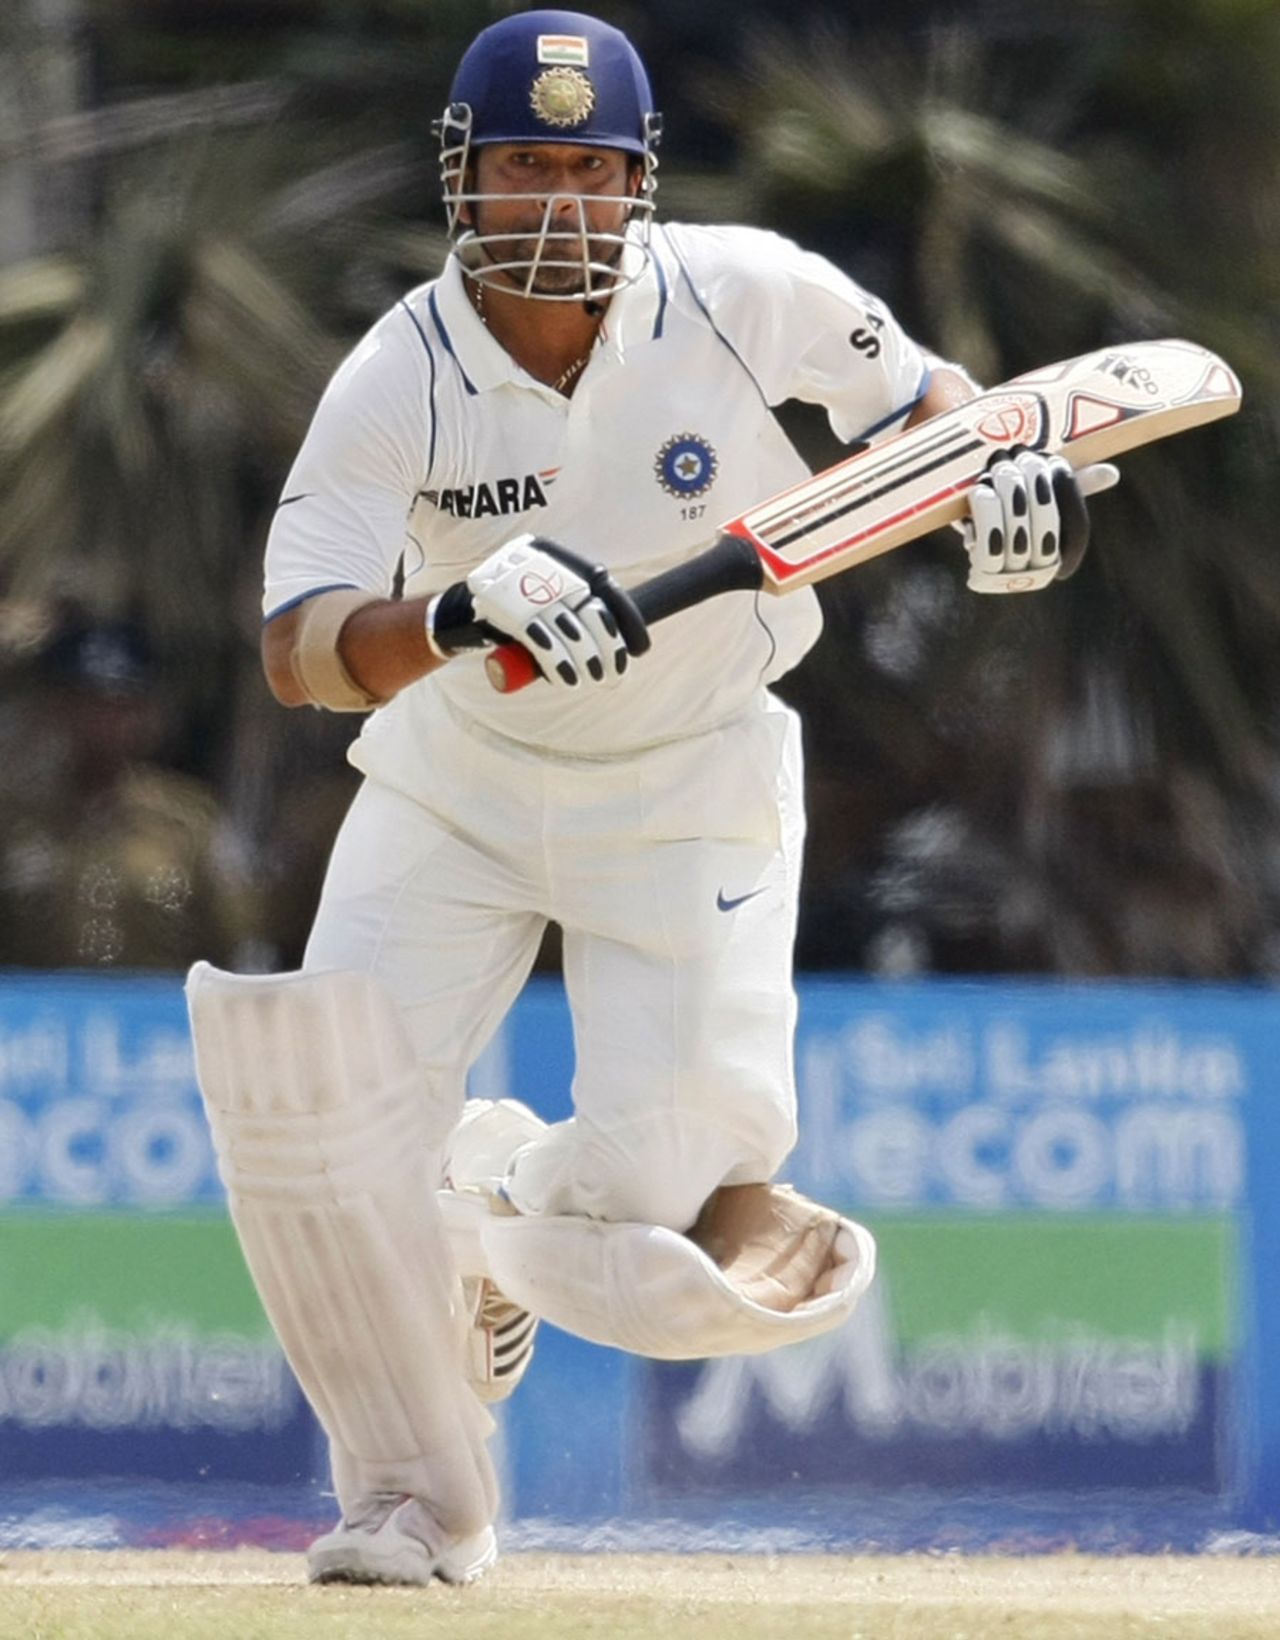 Sachin Tendulkar guided India to a strong position at lunch, Sri Lanka v India, 3rd Test, P Sara Oval, 5th day, August 7, 2010